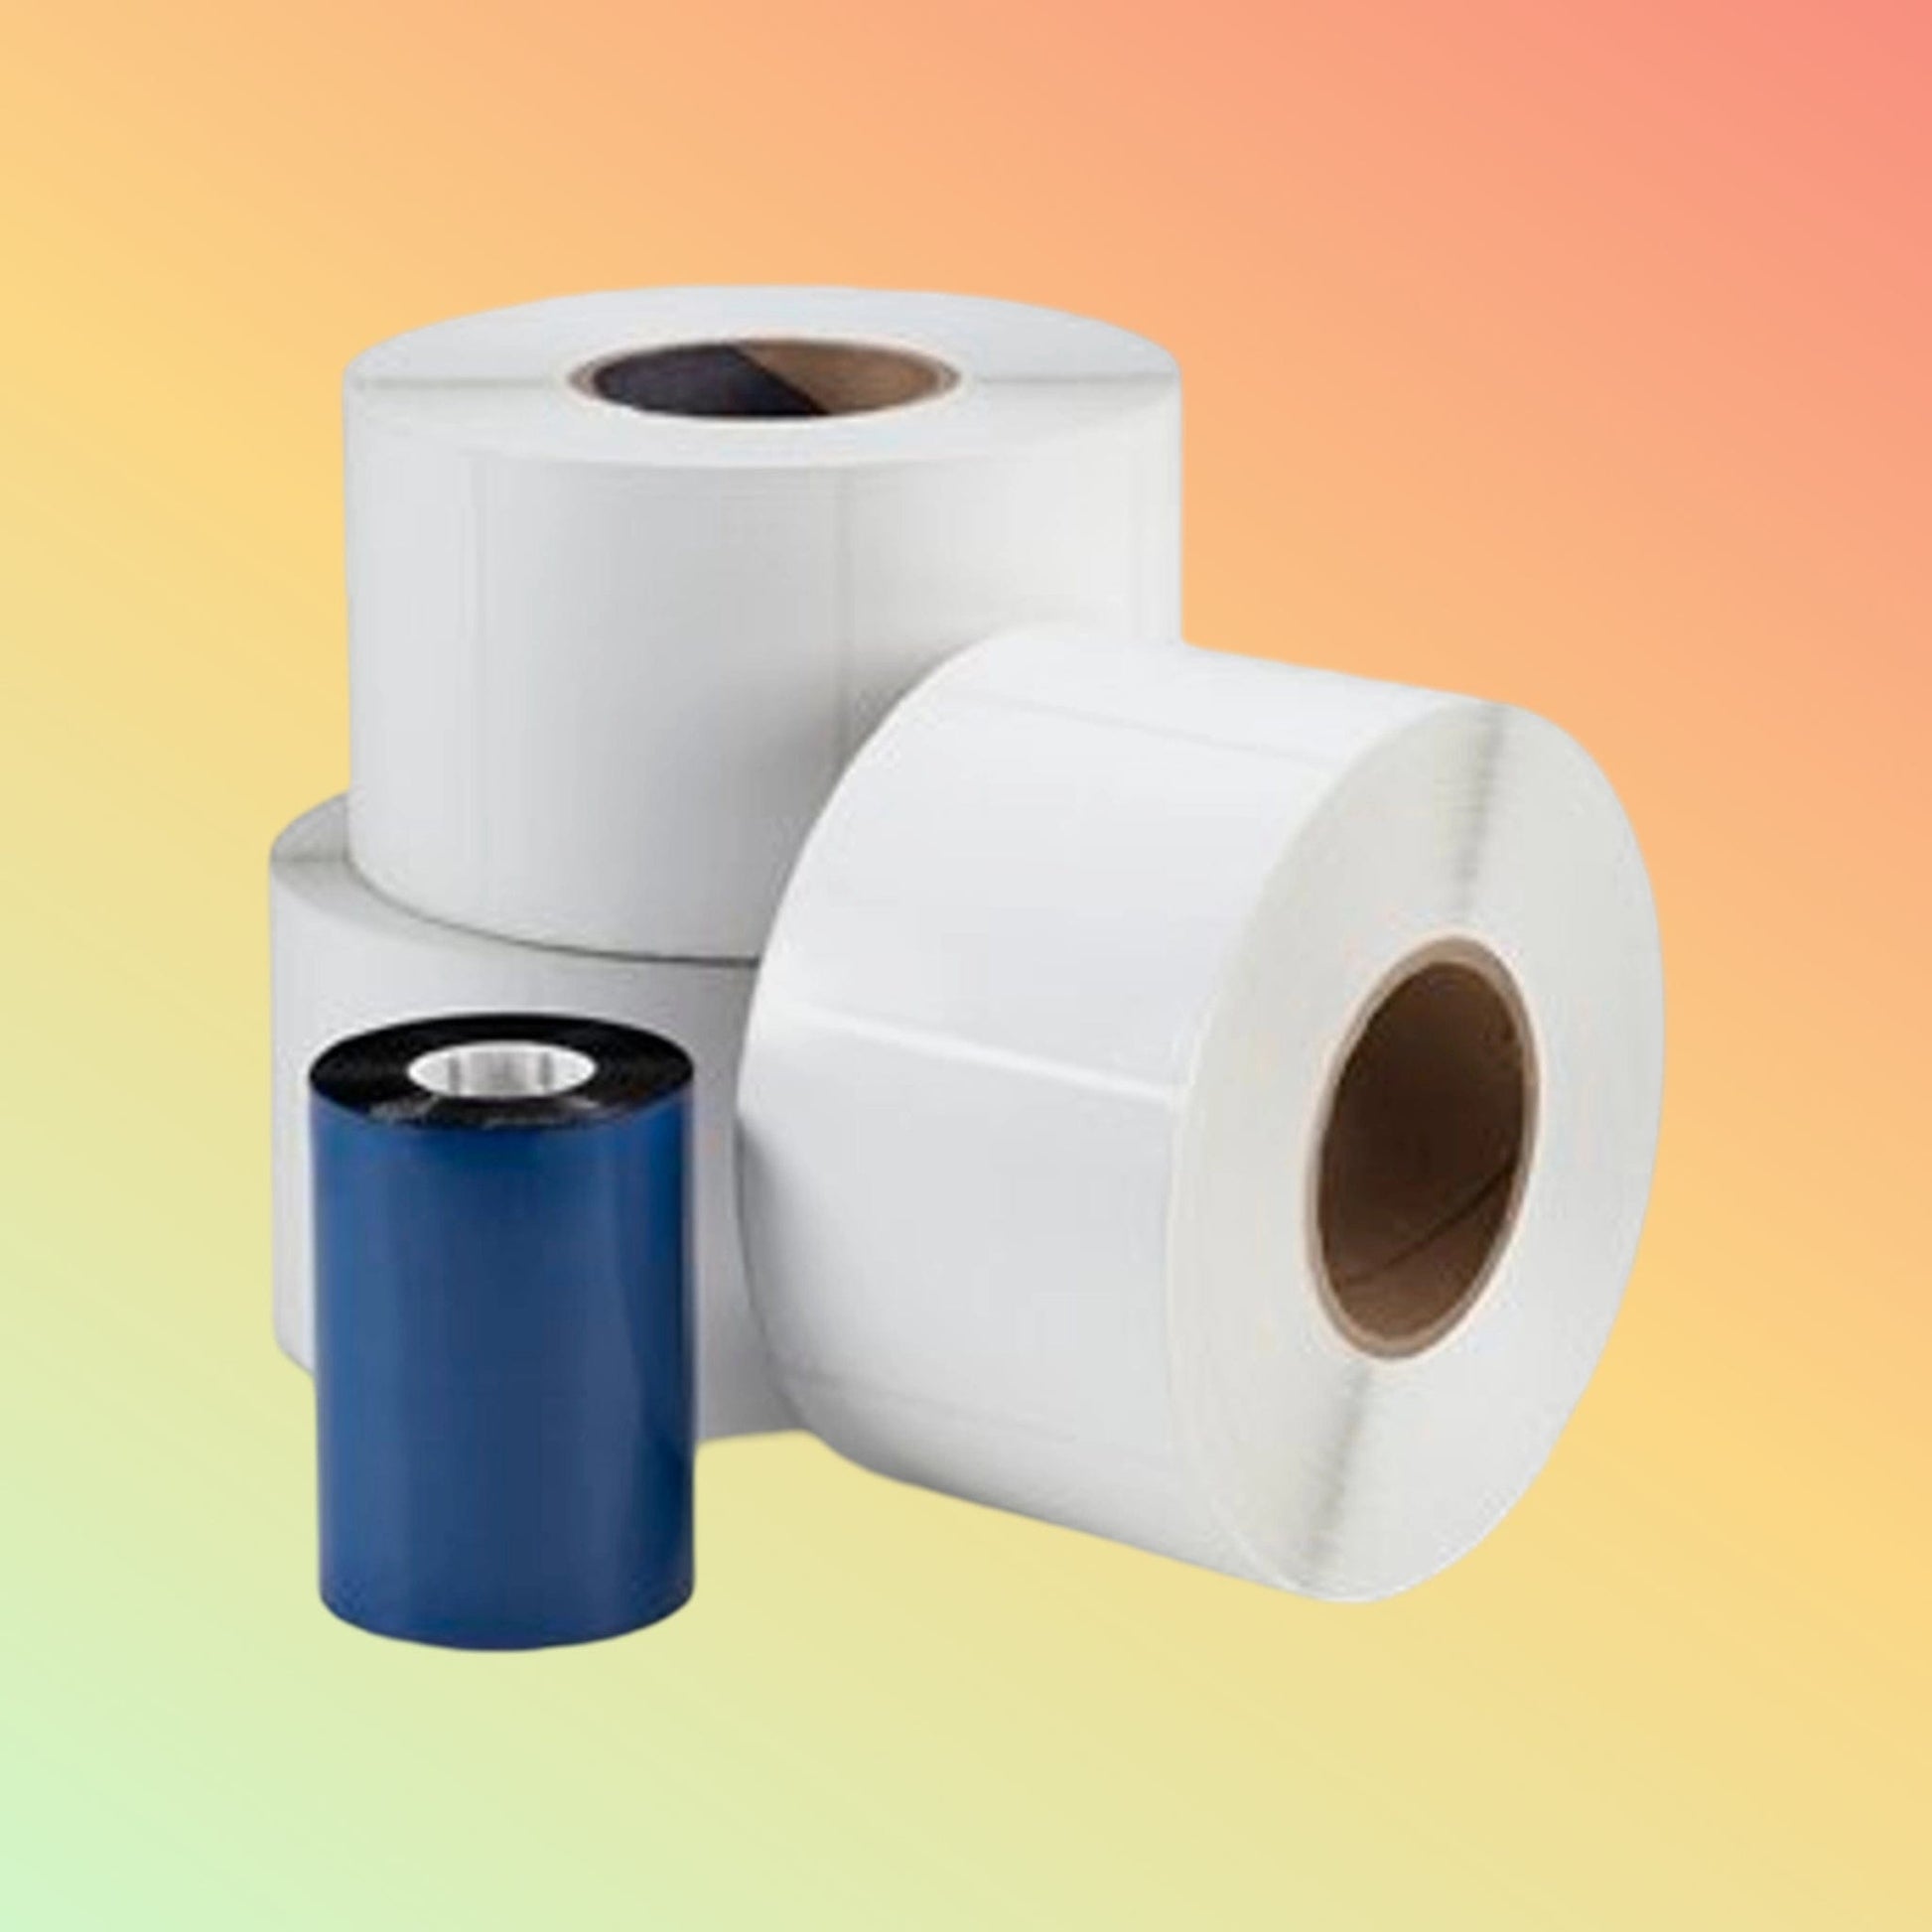 "Premium white thermal paper labels, 3 rolls with 500 each, compatible with eBay, Amazon shipping, resists water and dust."